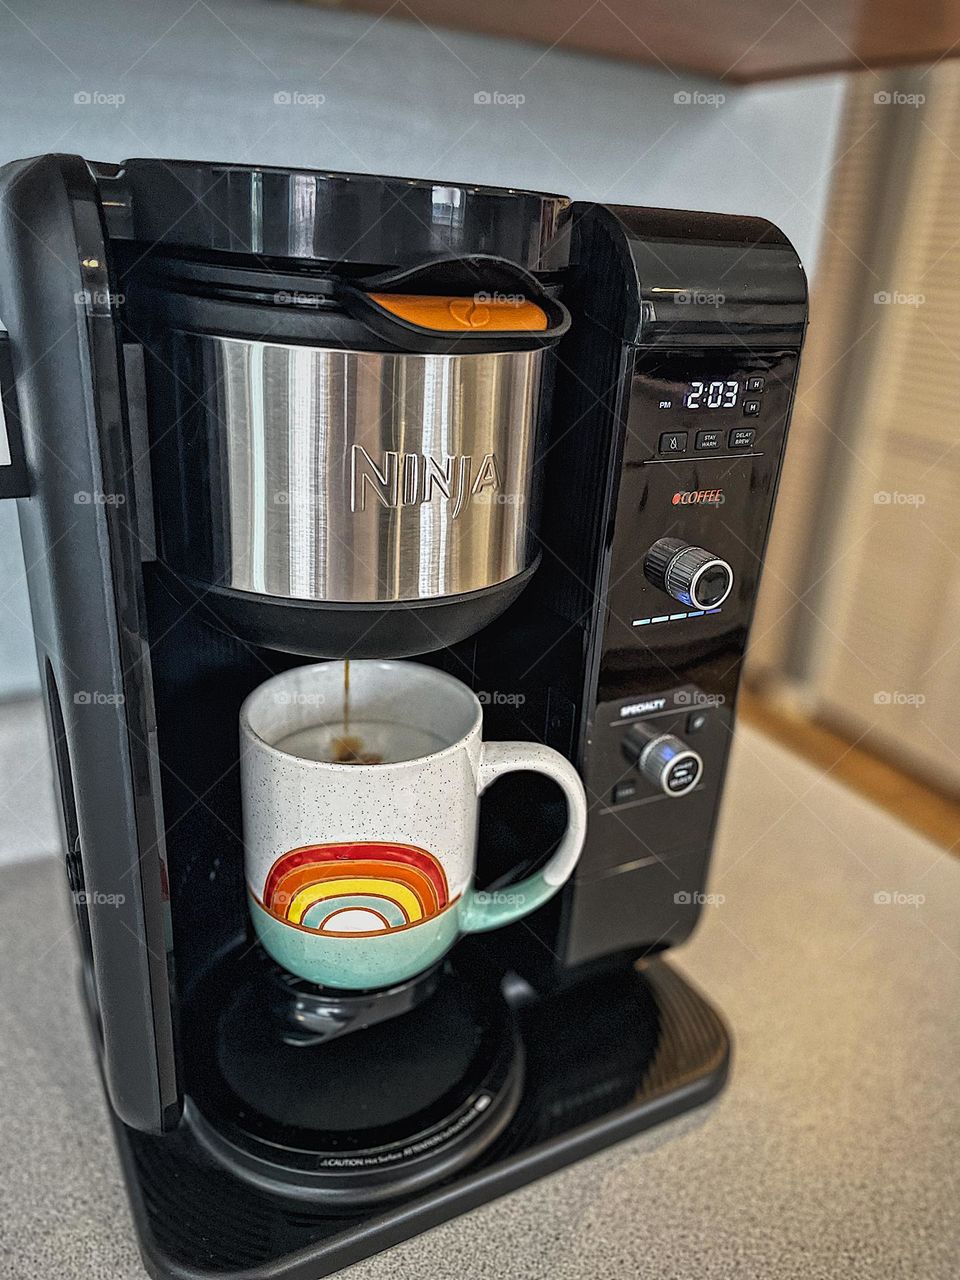 Making a cappuccino at home, daily routines, daily caffeine routine, caffeinated drinks at home, baby it’s cold outside, making a Cappuccino at home with the Ninja, Ninja coffee maker, Ninja coffee maker makes a cappuccino, afternoon pick me up